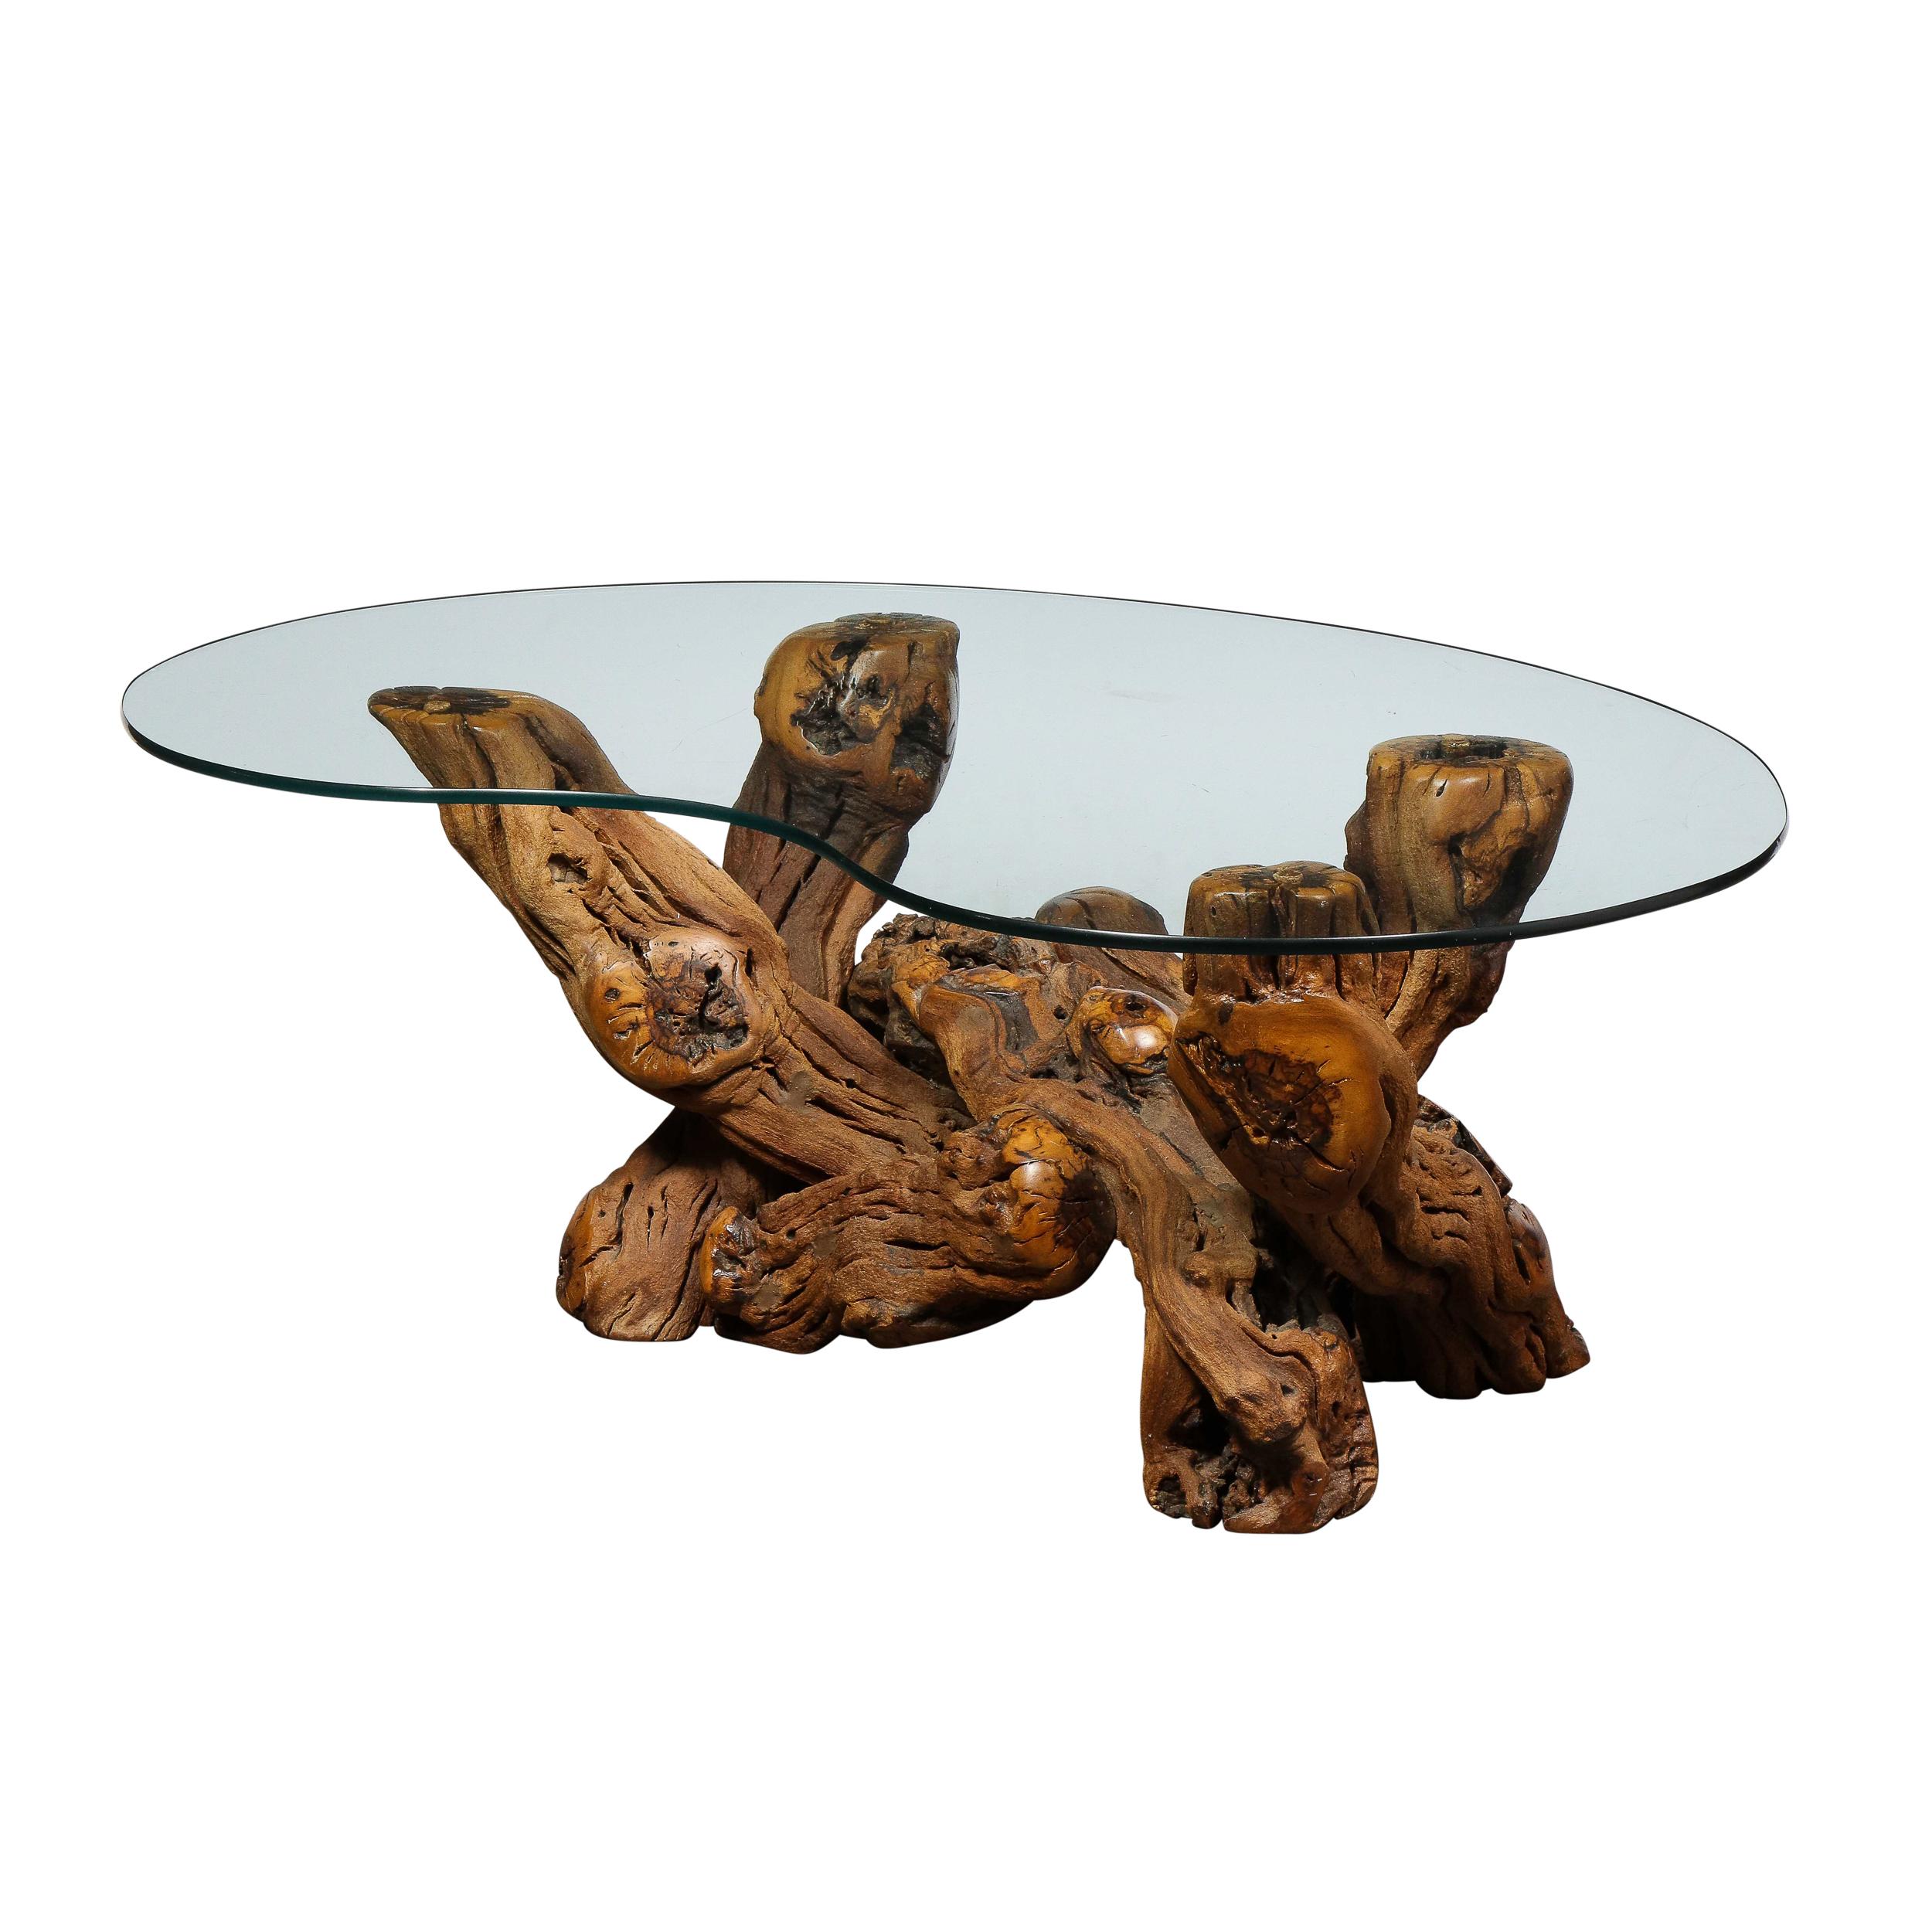 This stunning Mid-Century Modern cocktail table was realized in the United States circa 1960. It features a sculptural burled base consisting of interlocking boughs of driftwood whose limbs rise in four locations to support an amorphic piece of